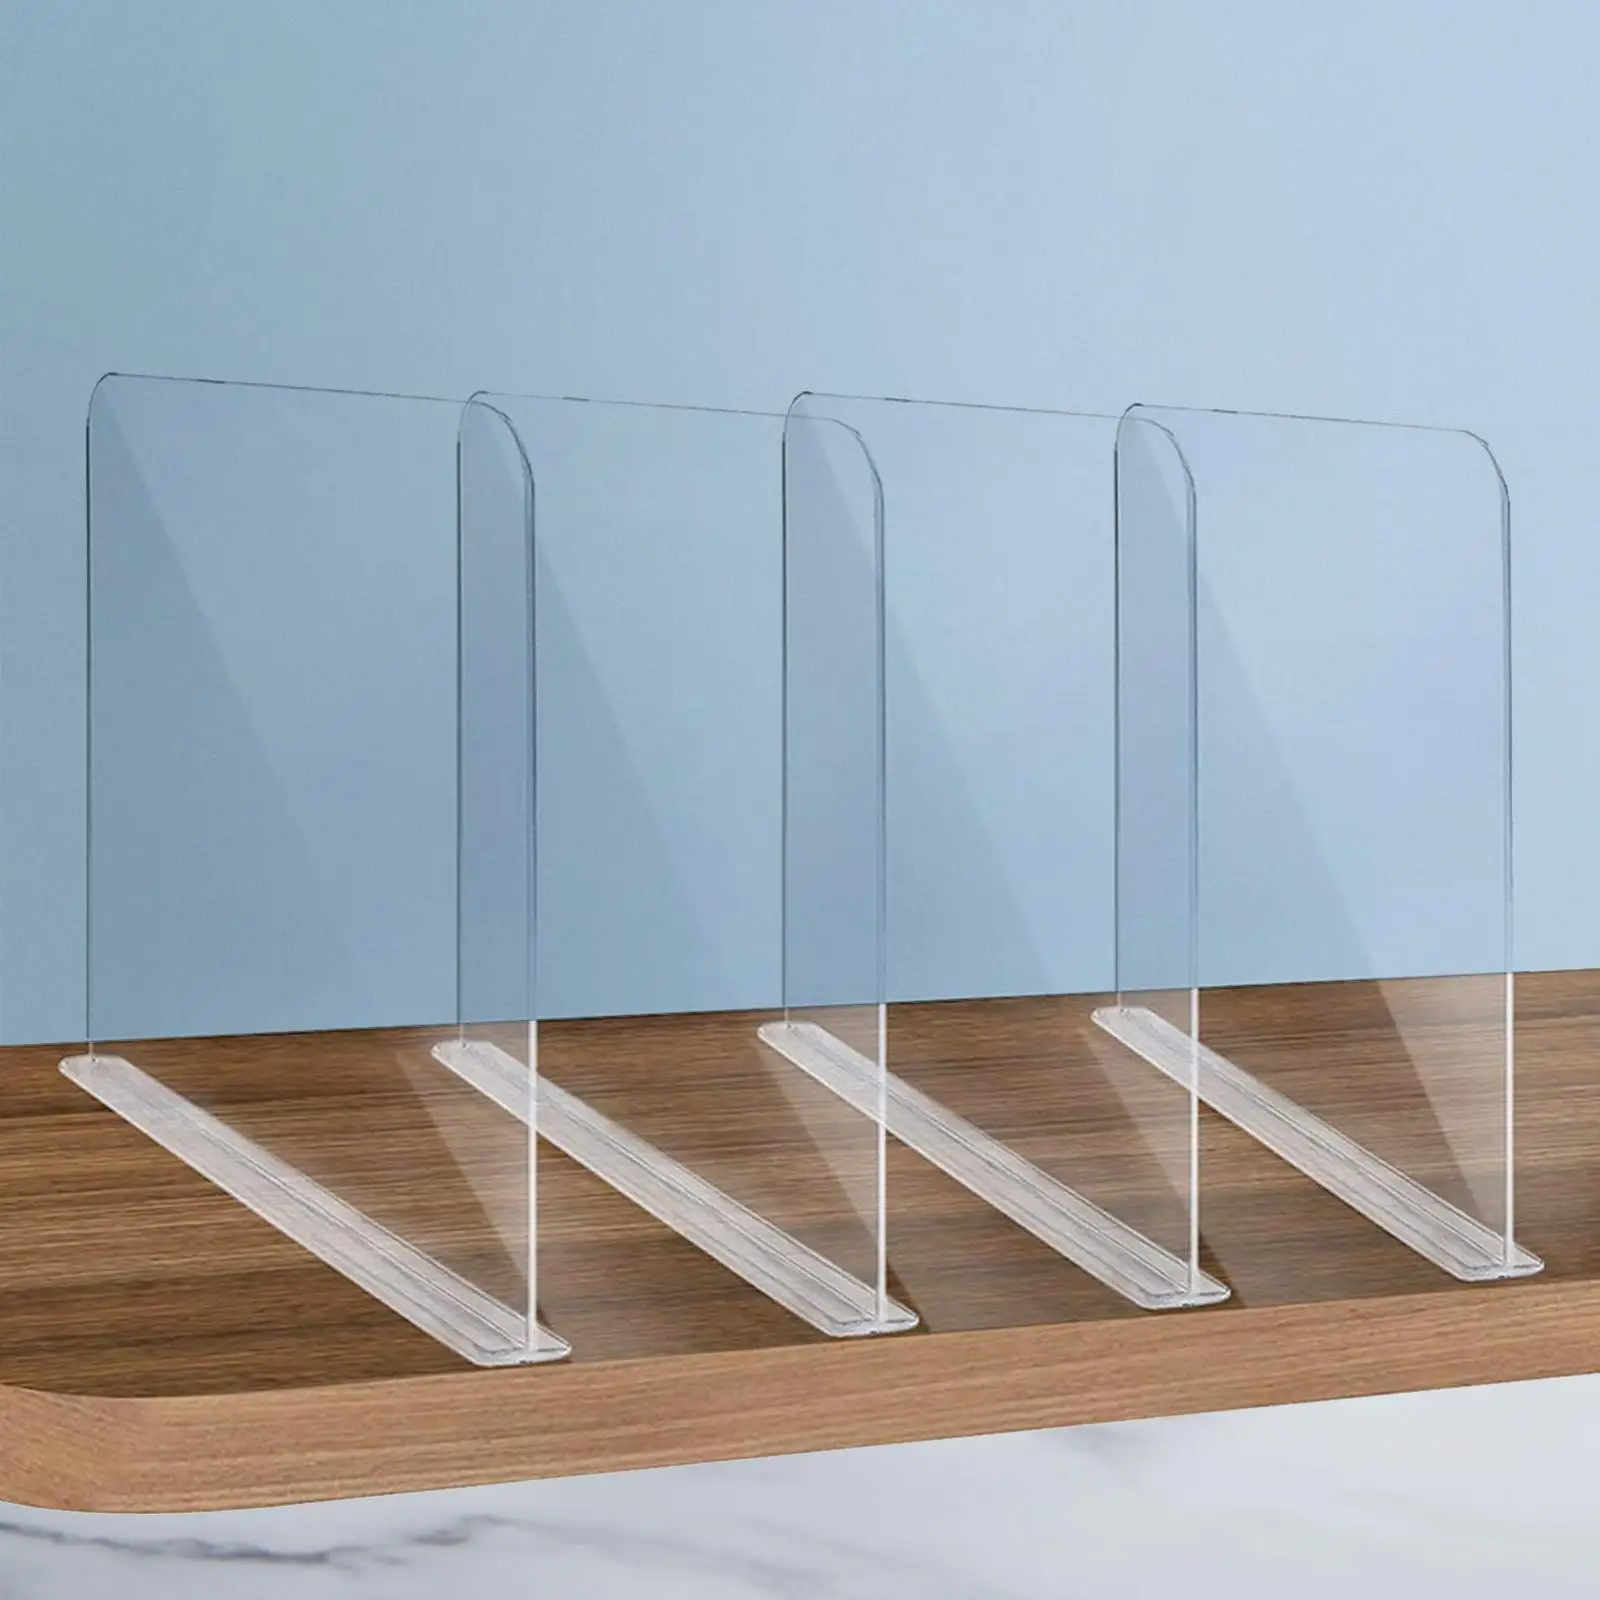 Acrylic Closet Shelf Sturdy Transparent Wardrobe Divider Portable Household Practical for Dressers Office Closet Wardrobe Shoes